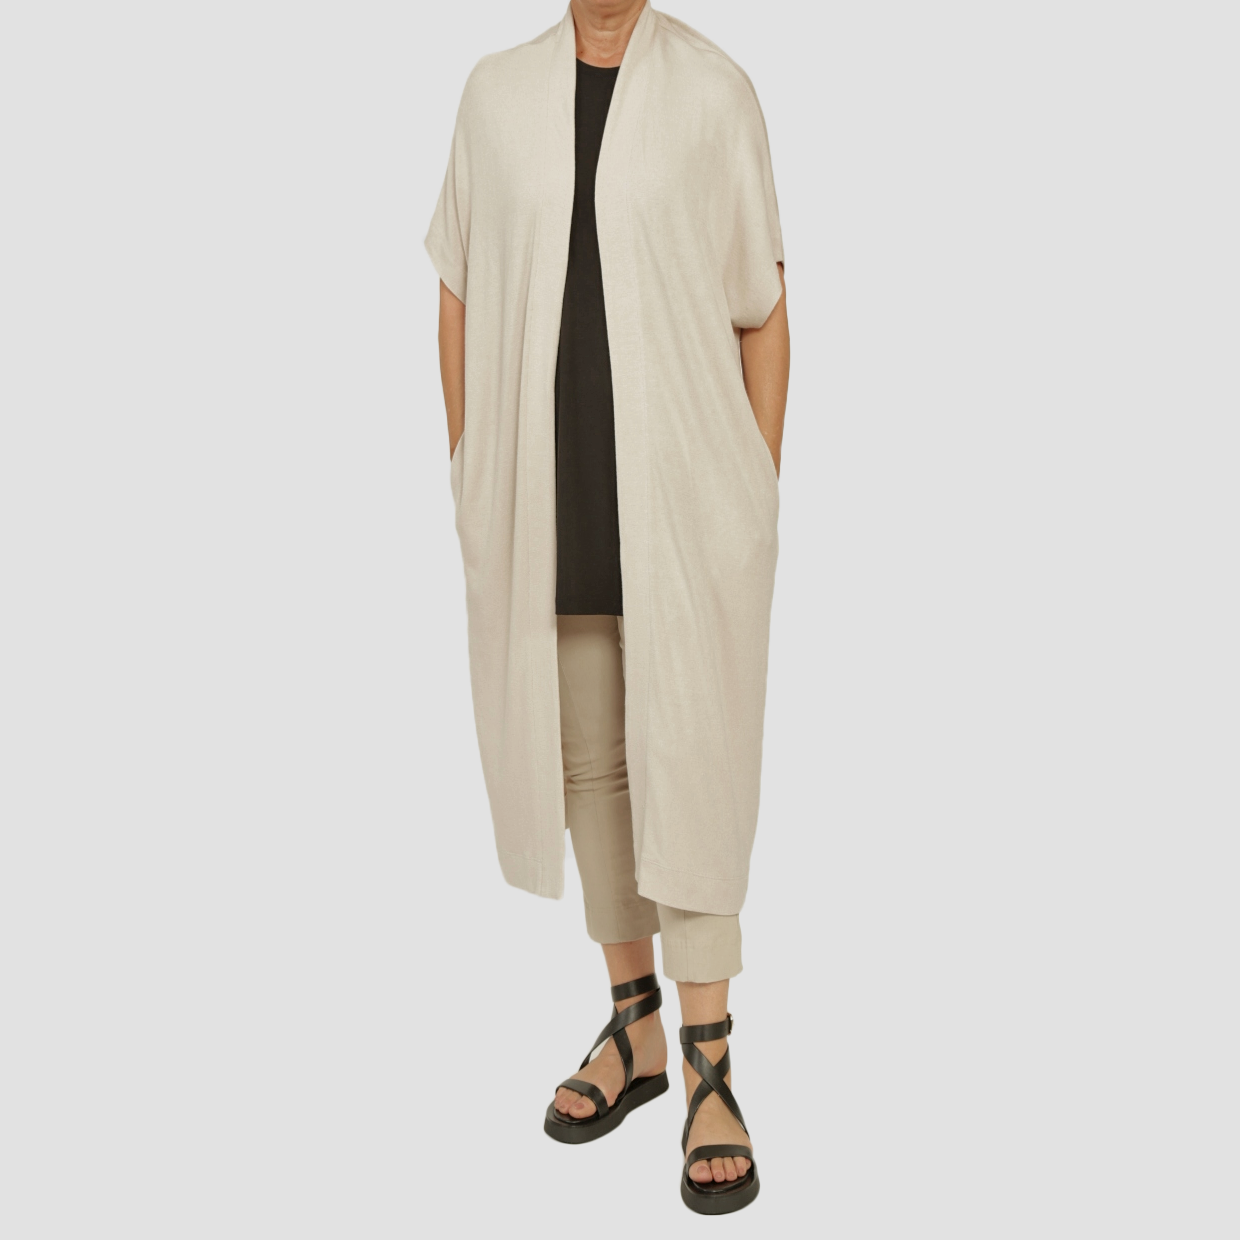 SUSSEX CARDIGAN - Oyster